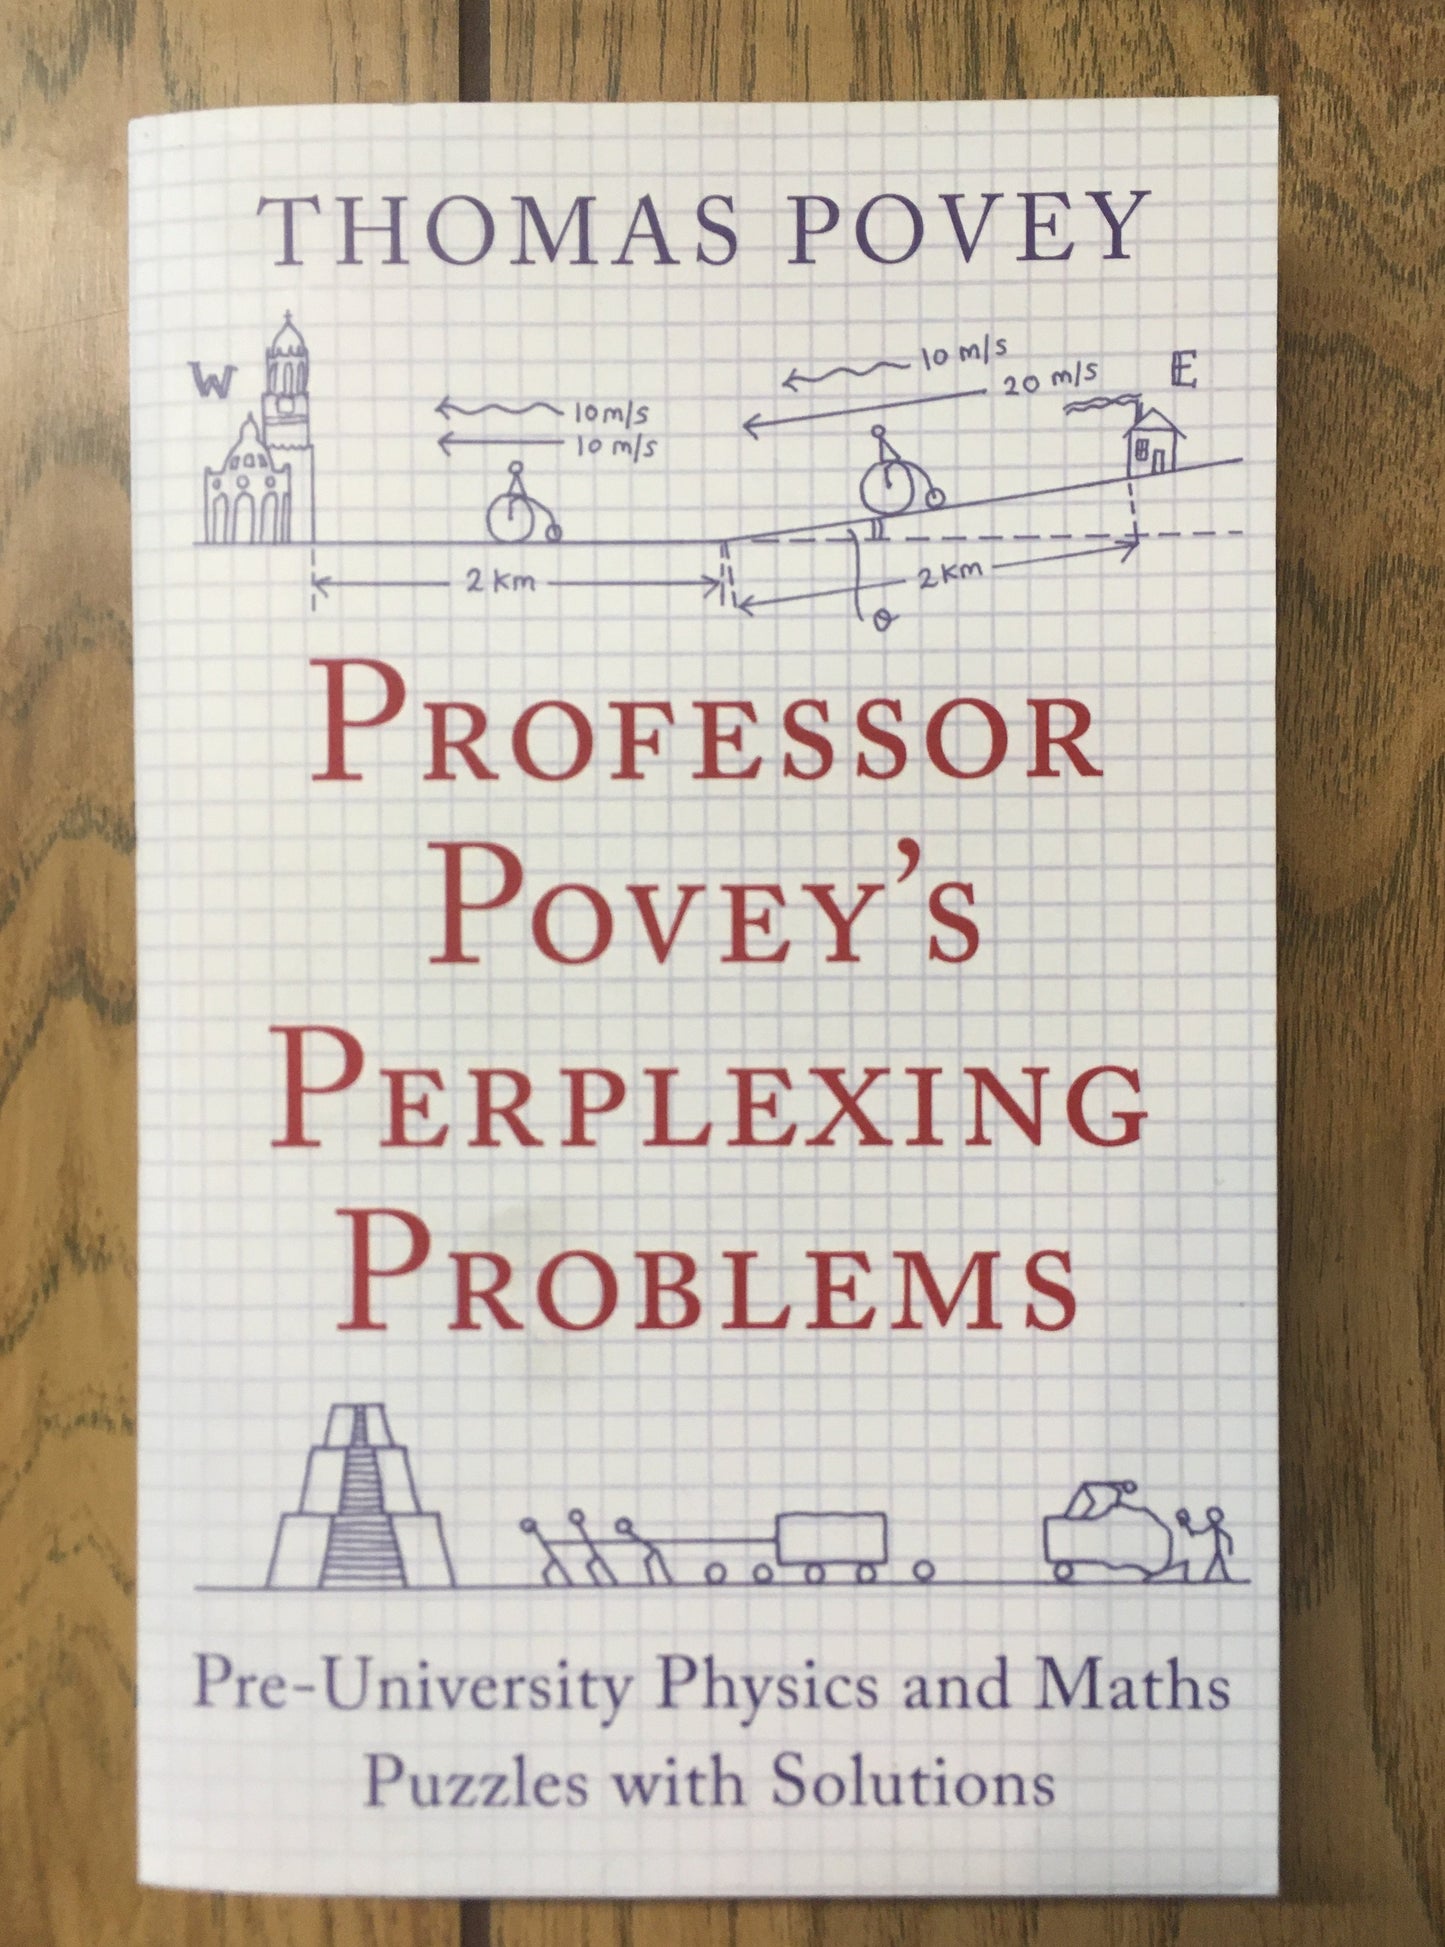 Professor Povey's Perplexing Problems: Pre-University Physics and Maths Puzzles with Solutions